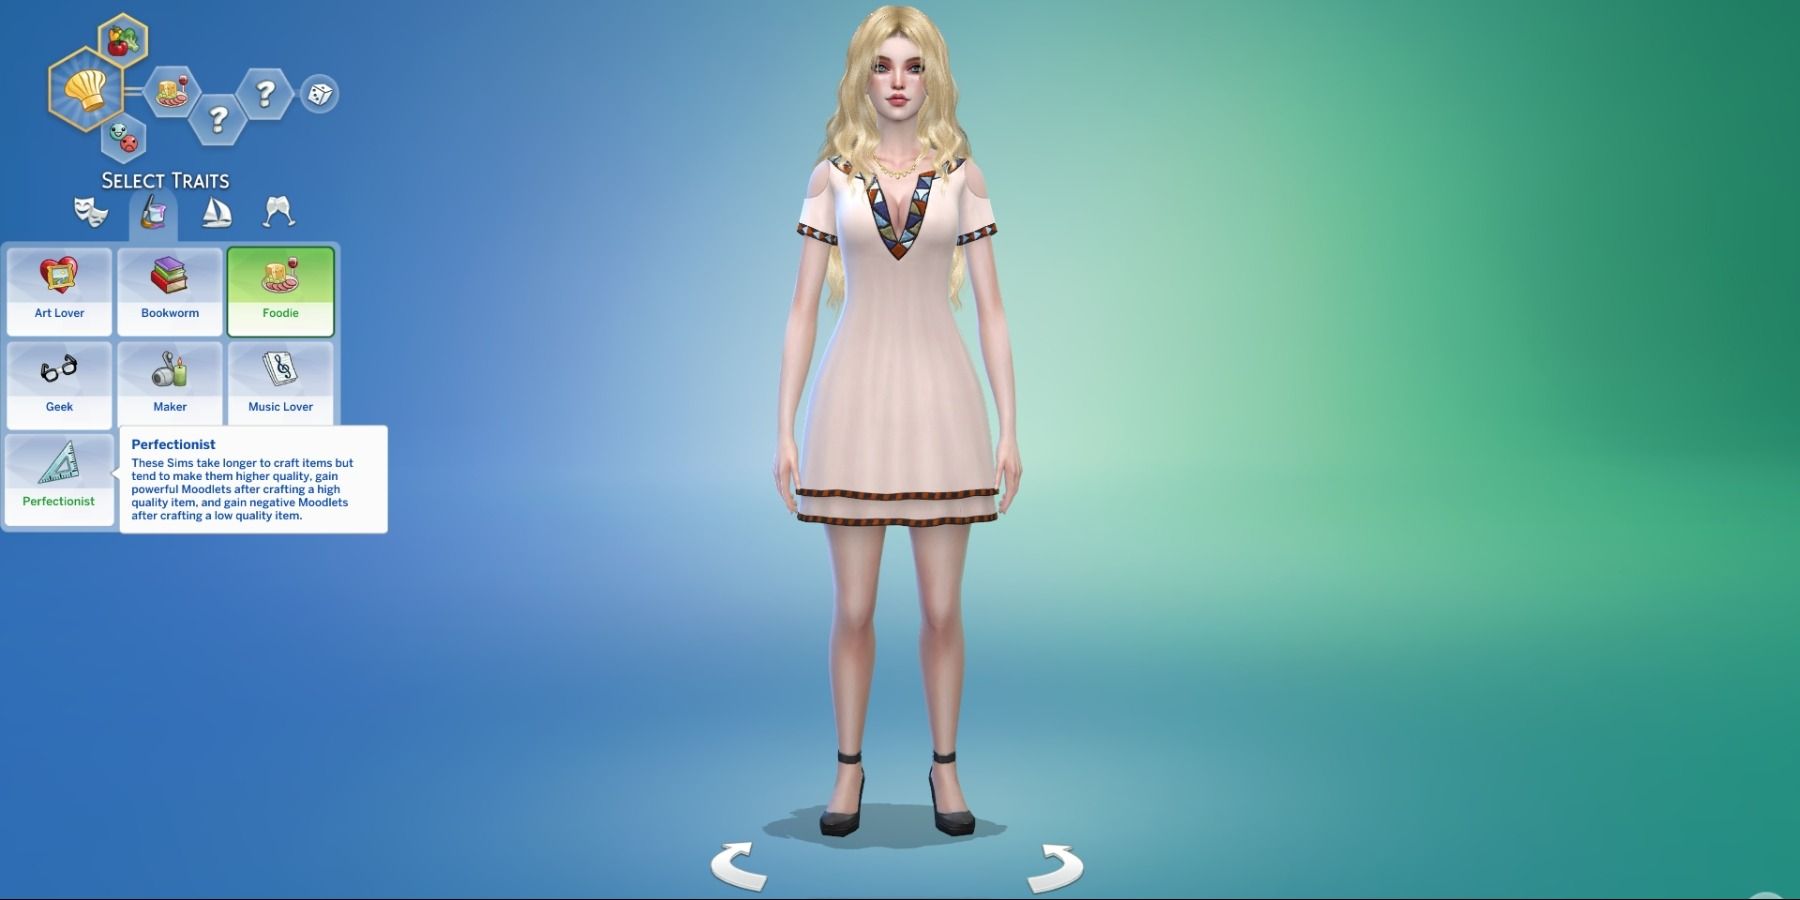 The Sims Resource - Want to download poses on TSR? Well, you are